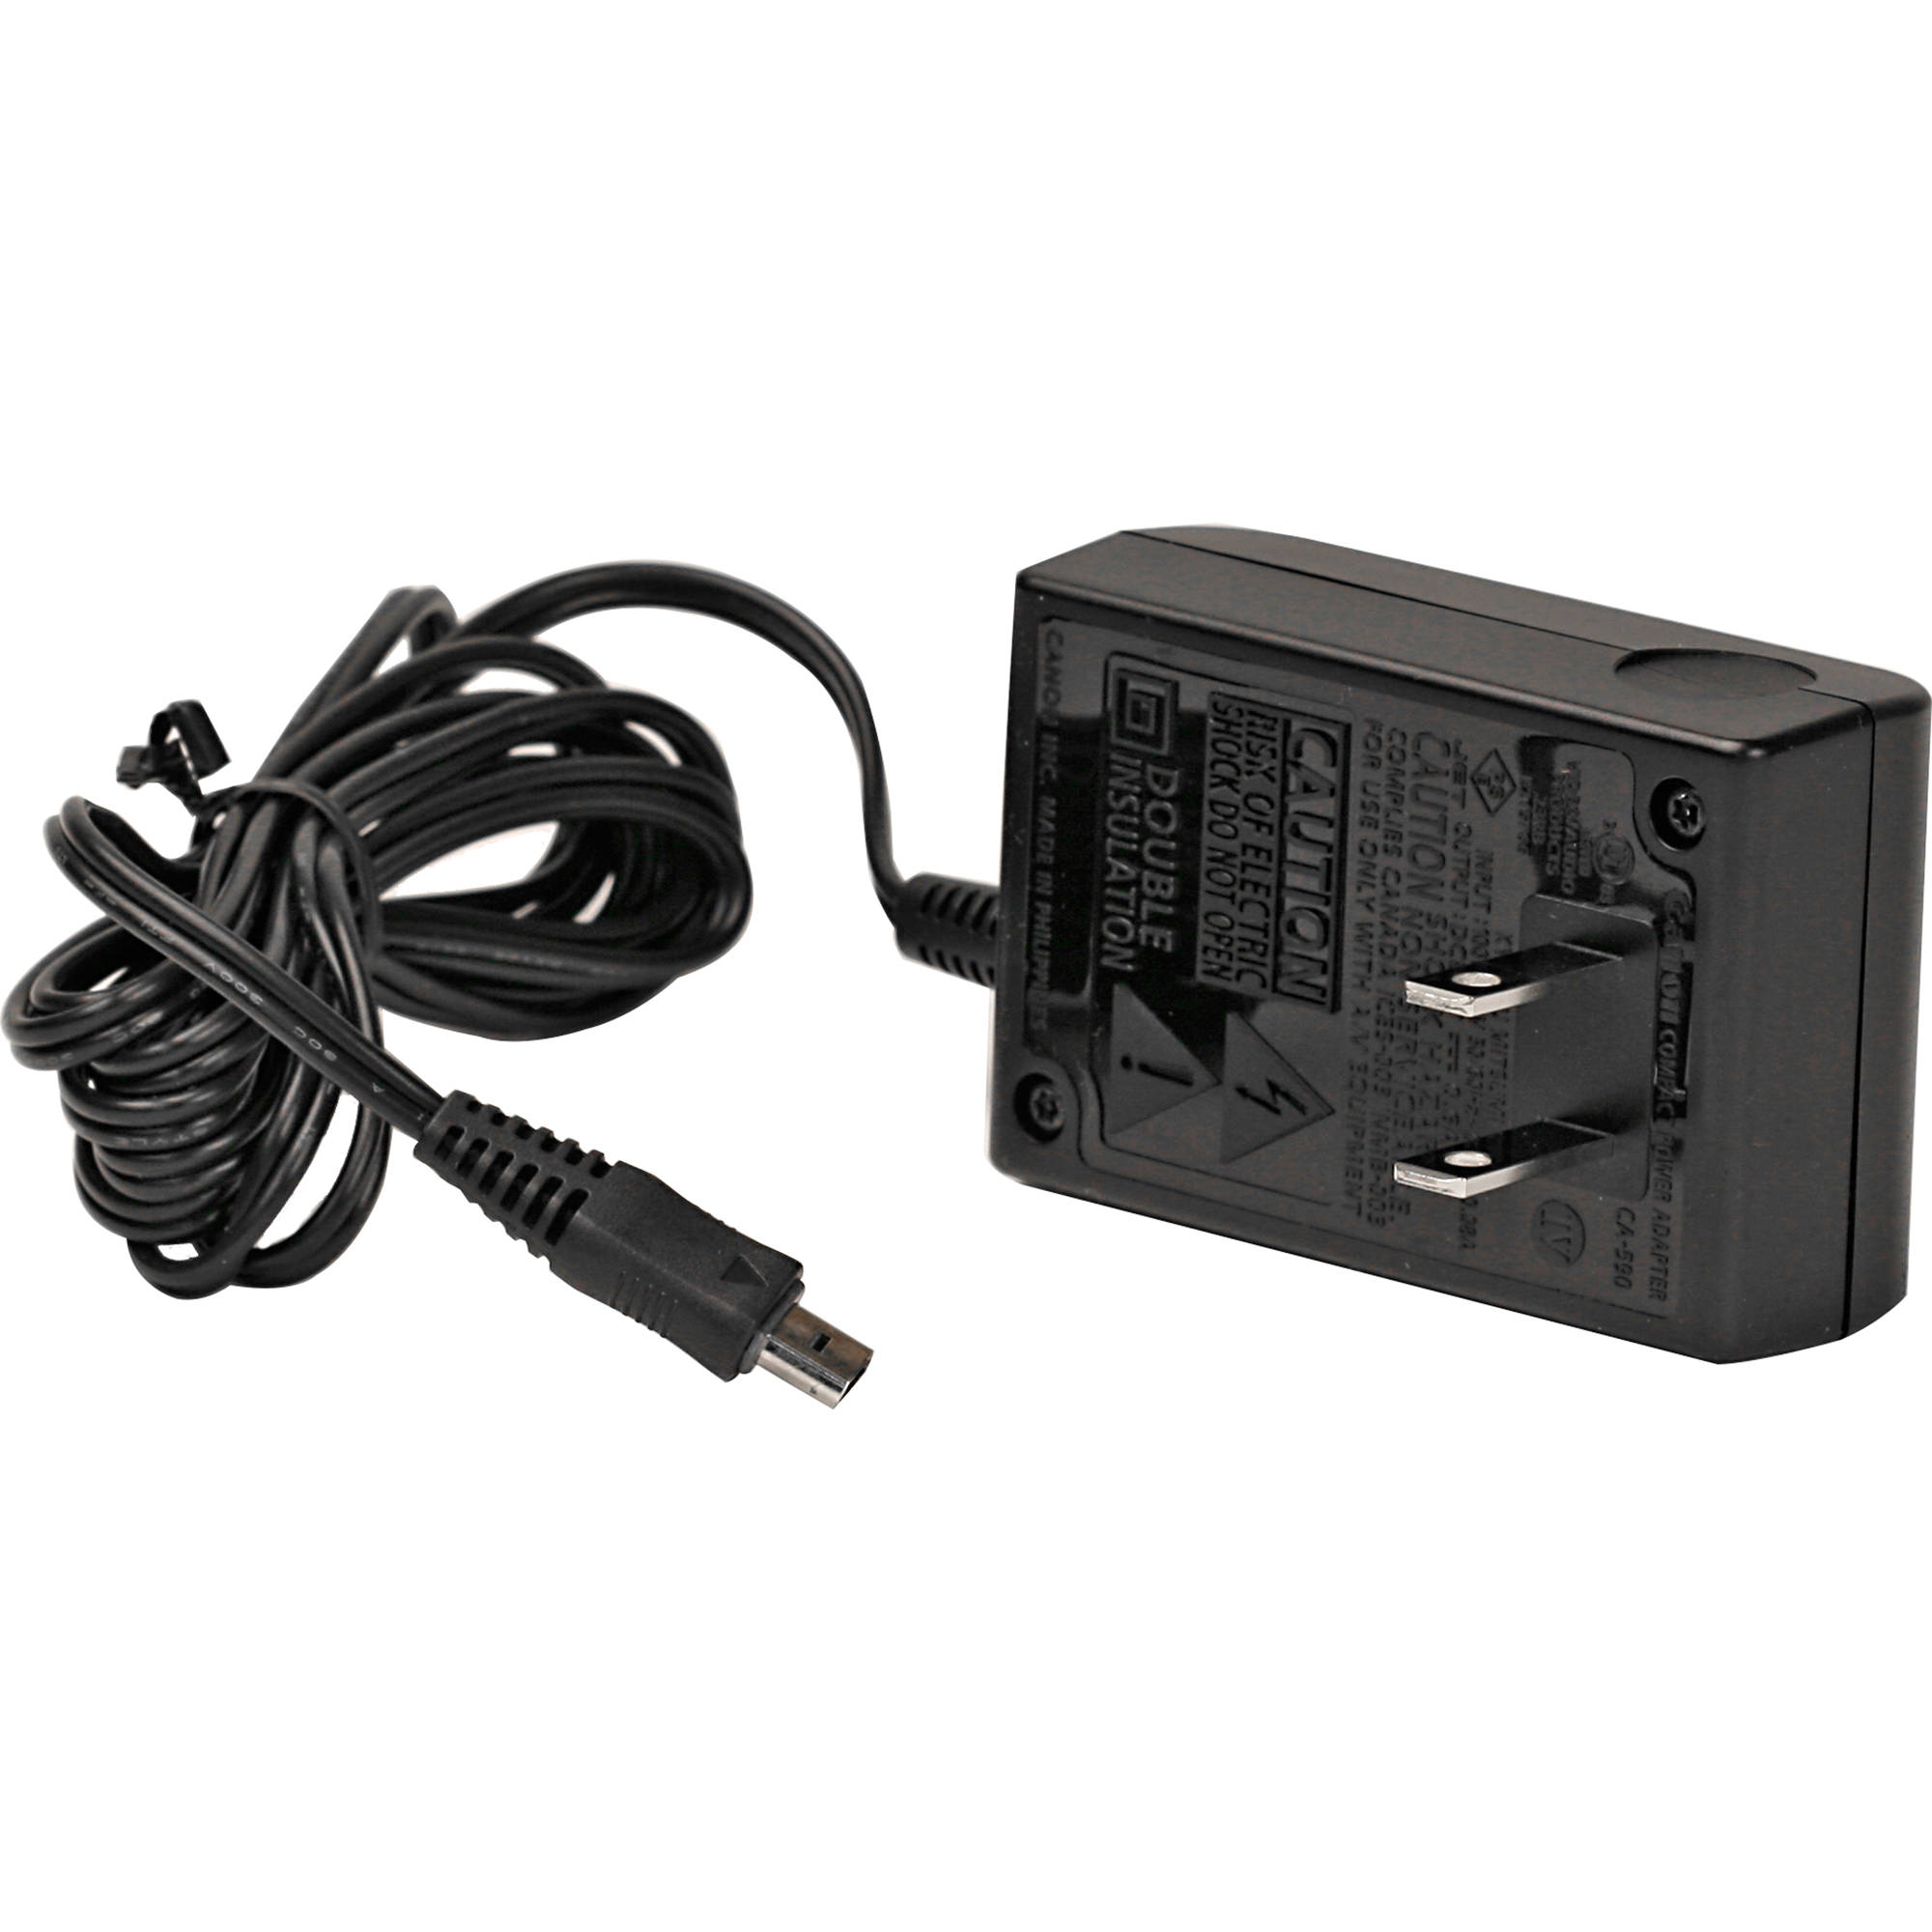 CANON Compact Power Adapter CA-590